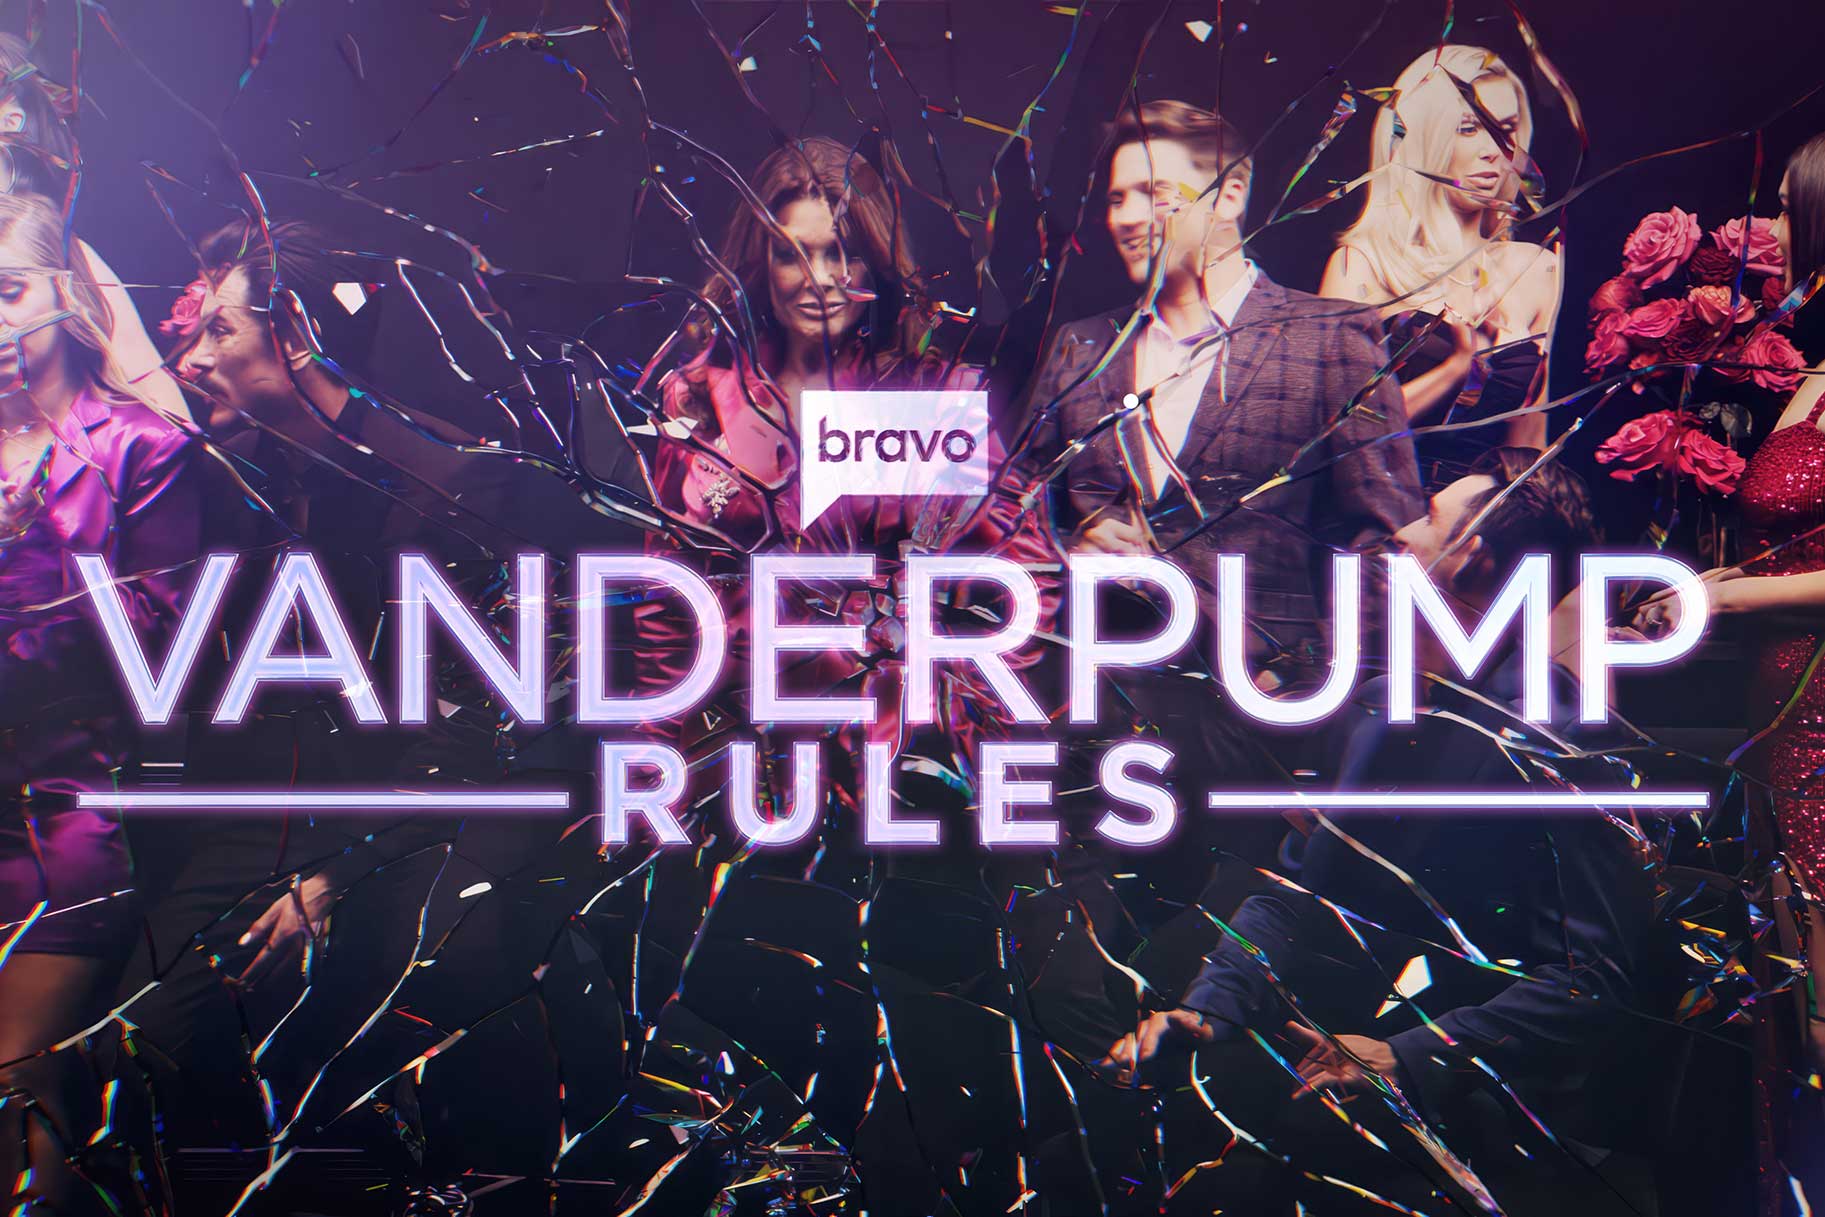 The cast of Vanderpump Rules with a shattered glass effect and logo overlayed